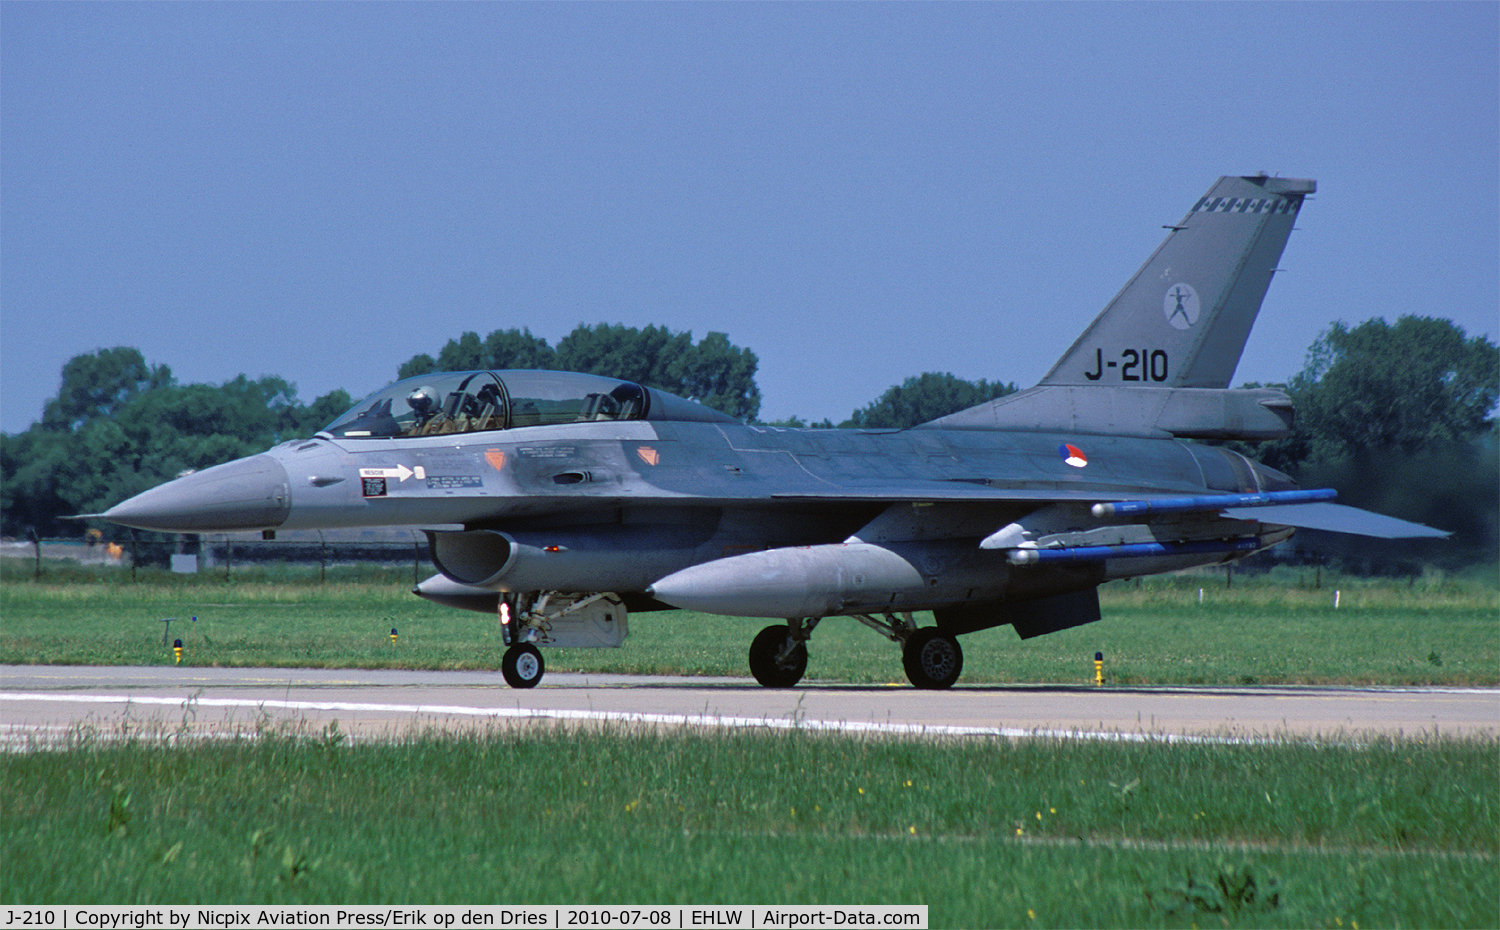 J-210, 1983 General Dynamics F-16BM Fighting Falcon C/N 6E-29, Royal Netherlands AF F-16BM with registration J-210 is assigned to 323 sqn and based at Leeuwarden AB.